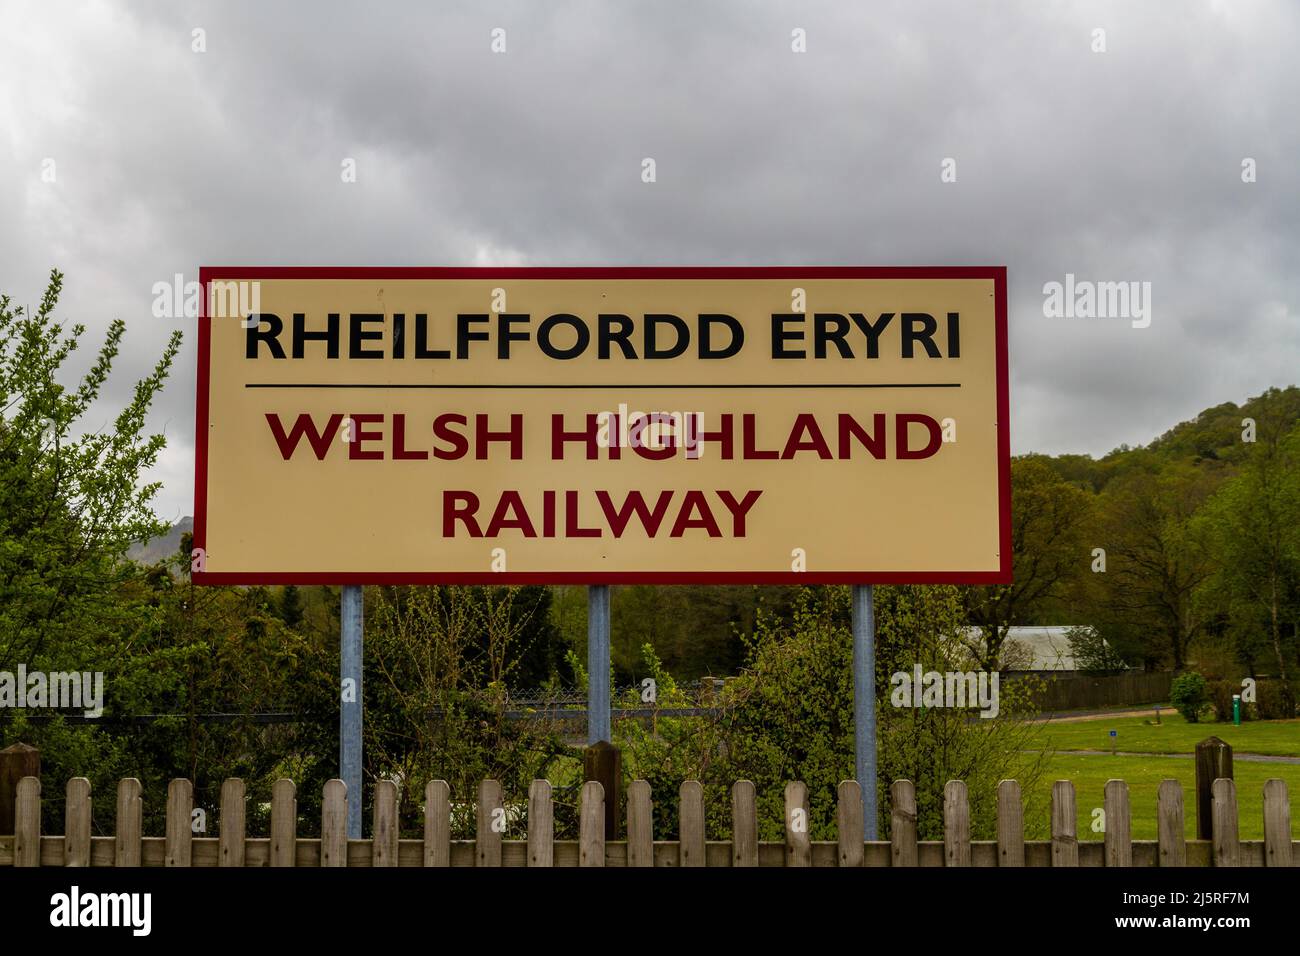 Sign for the Welsh highland railway, narrow gauge heritage railway in North Wales. Stock Photo